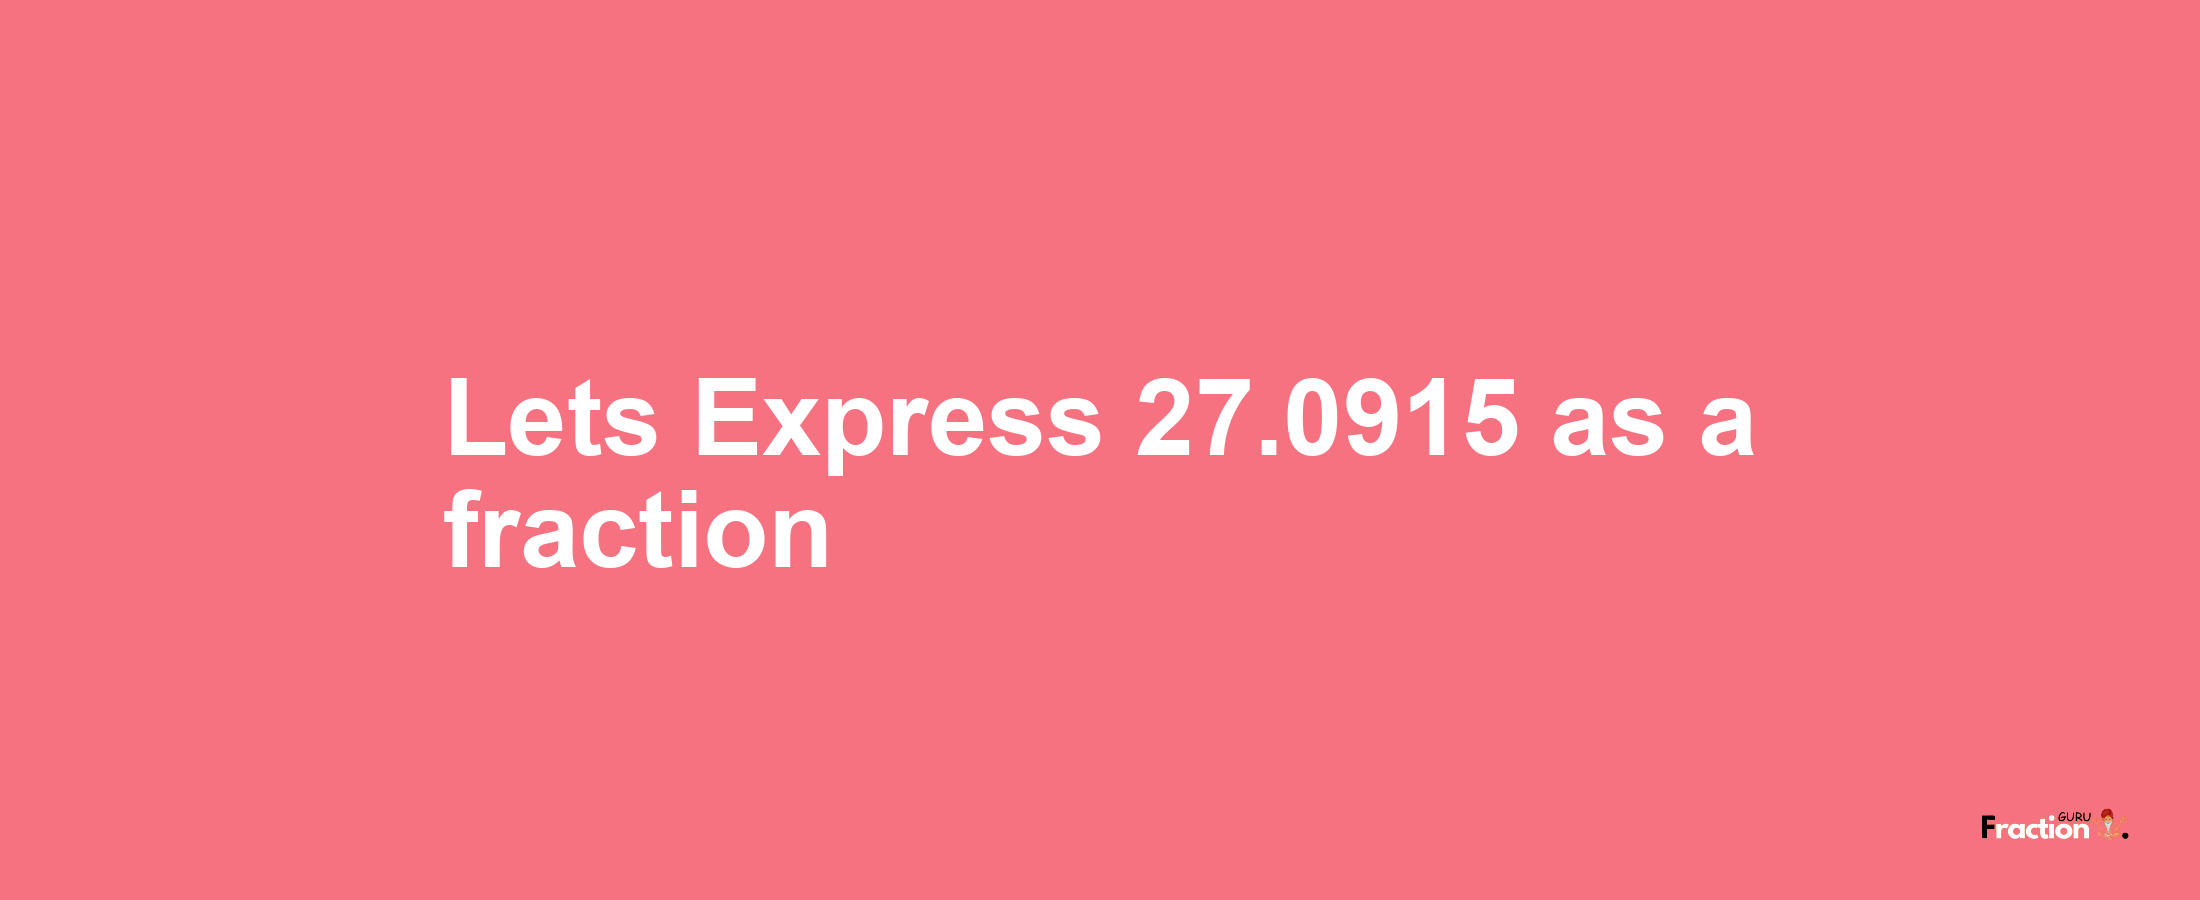 Lets Express 27.0915 as afraction